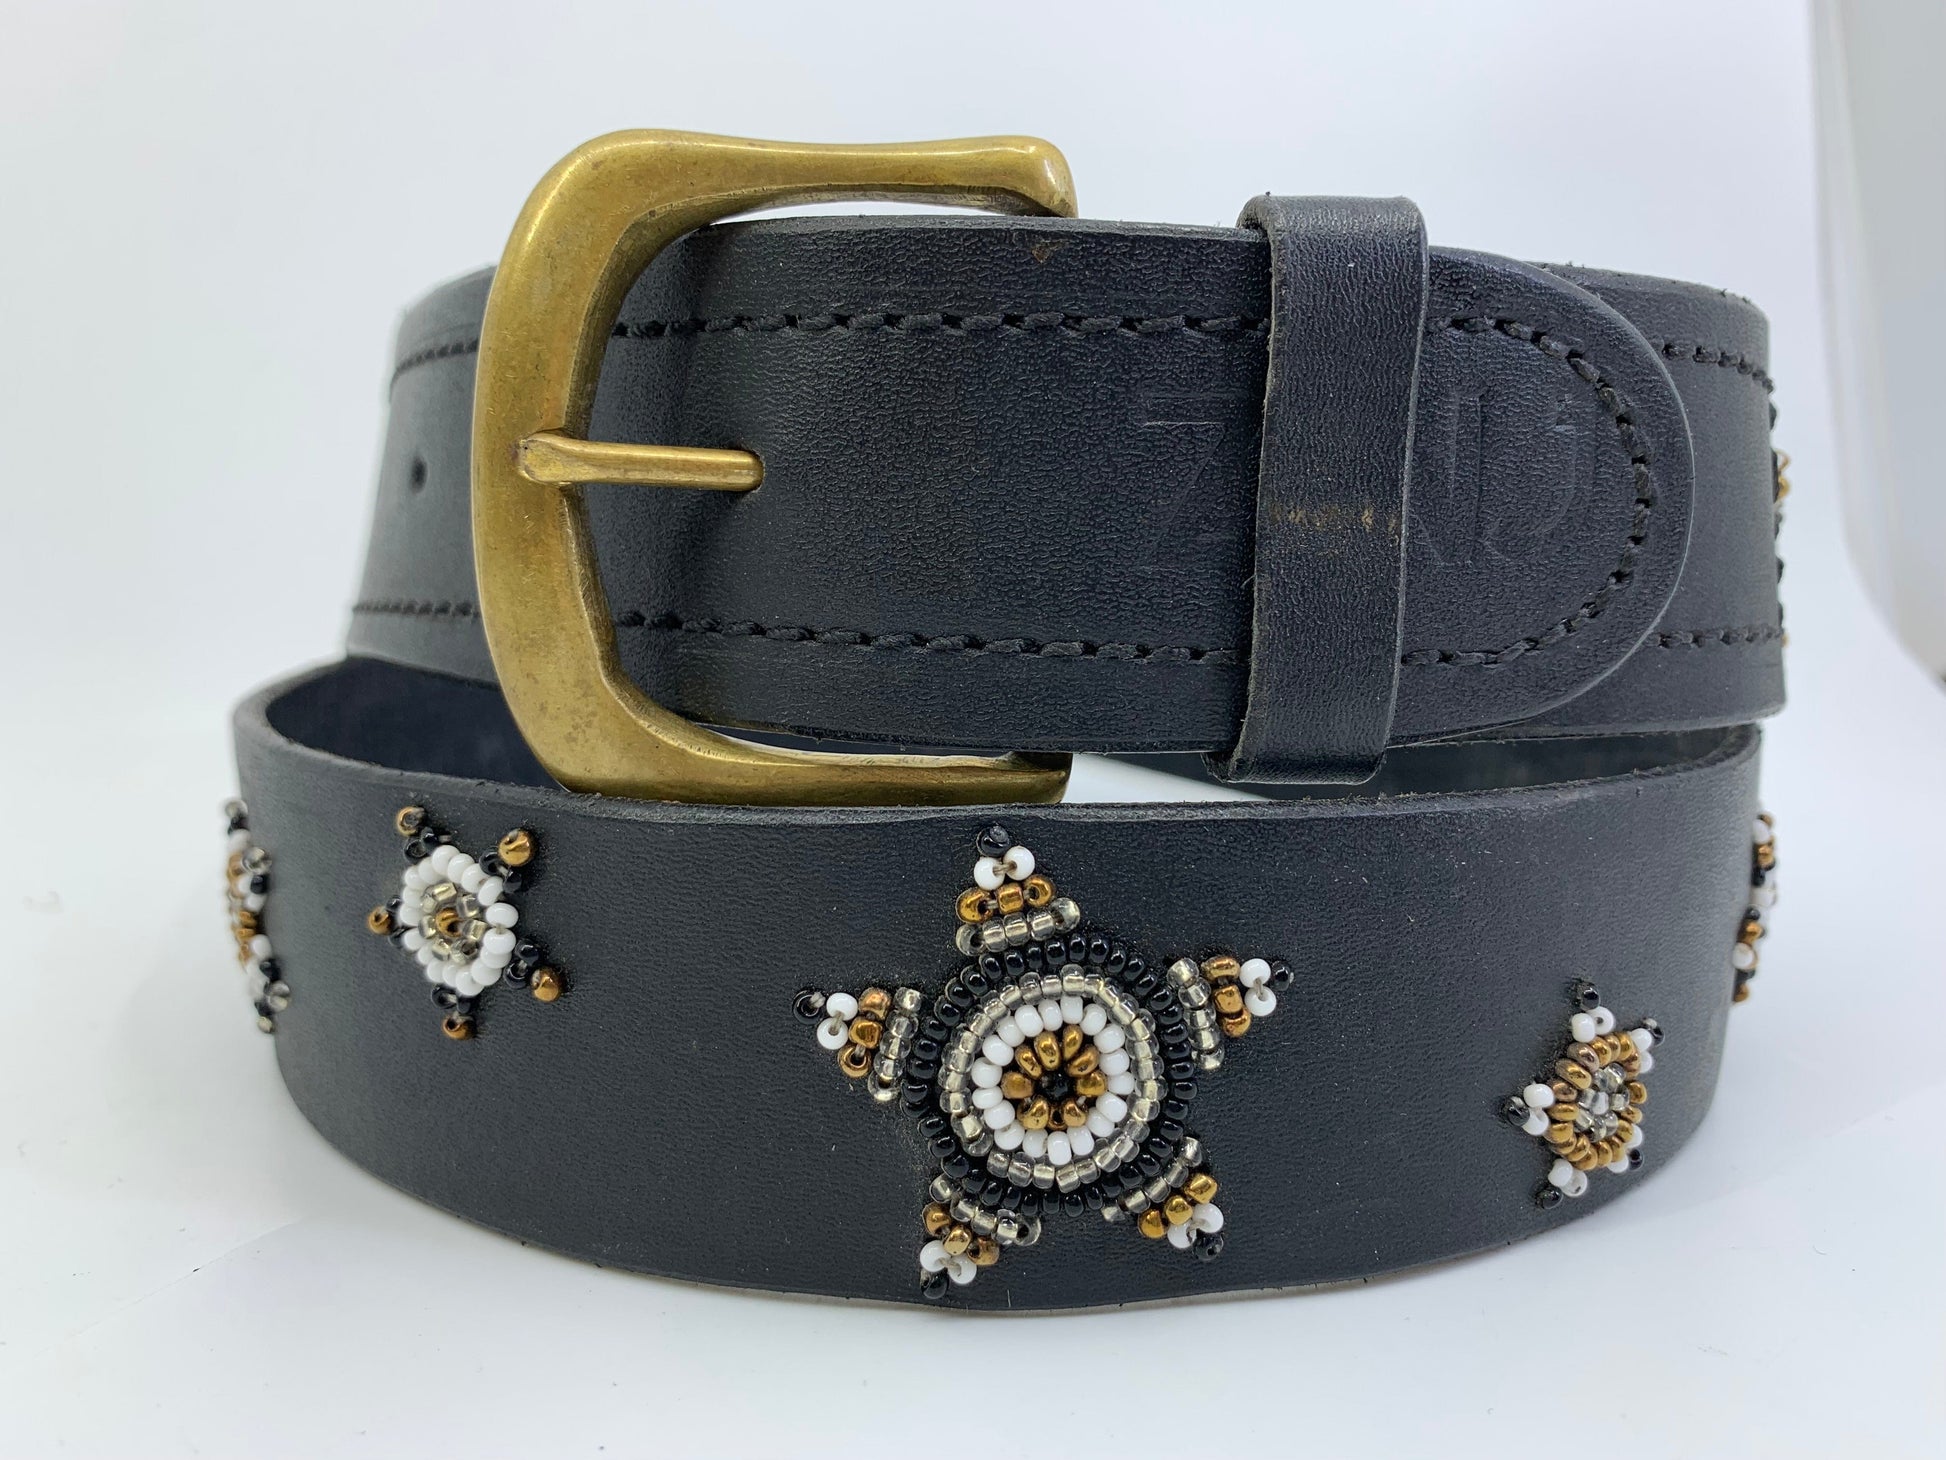 Equestrian Team Apparel M Beaded Belt- 1" White/Gold/Black/Silver Stars equestrian team apparel online tack store mobile tack store custom farm apparel custom show stable clothing equestrian lifestyle horse show clothing riding clothes horses equestrian tack store